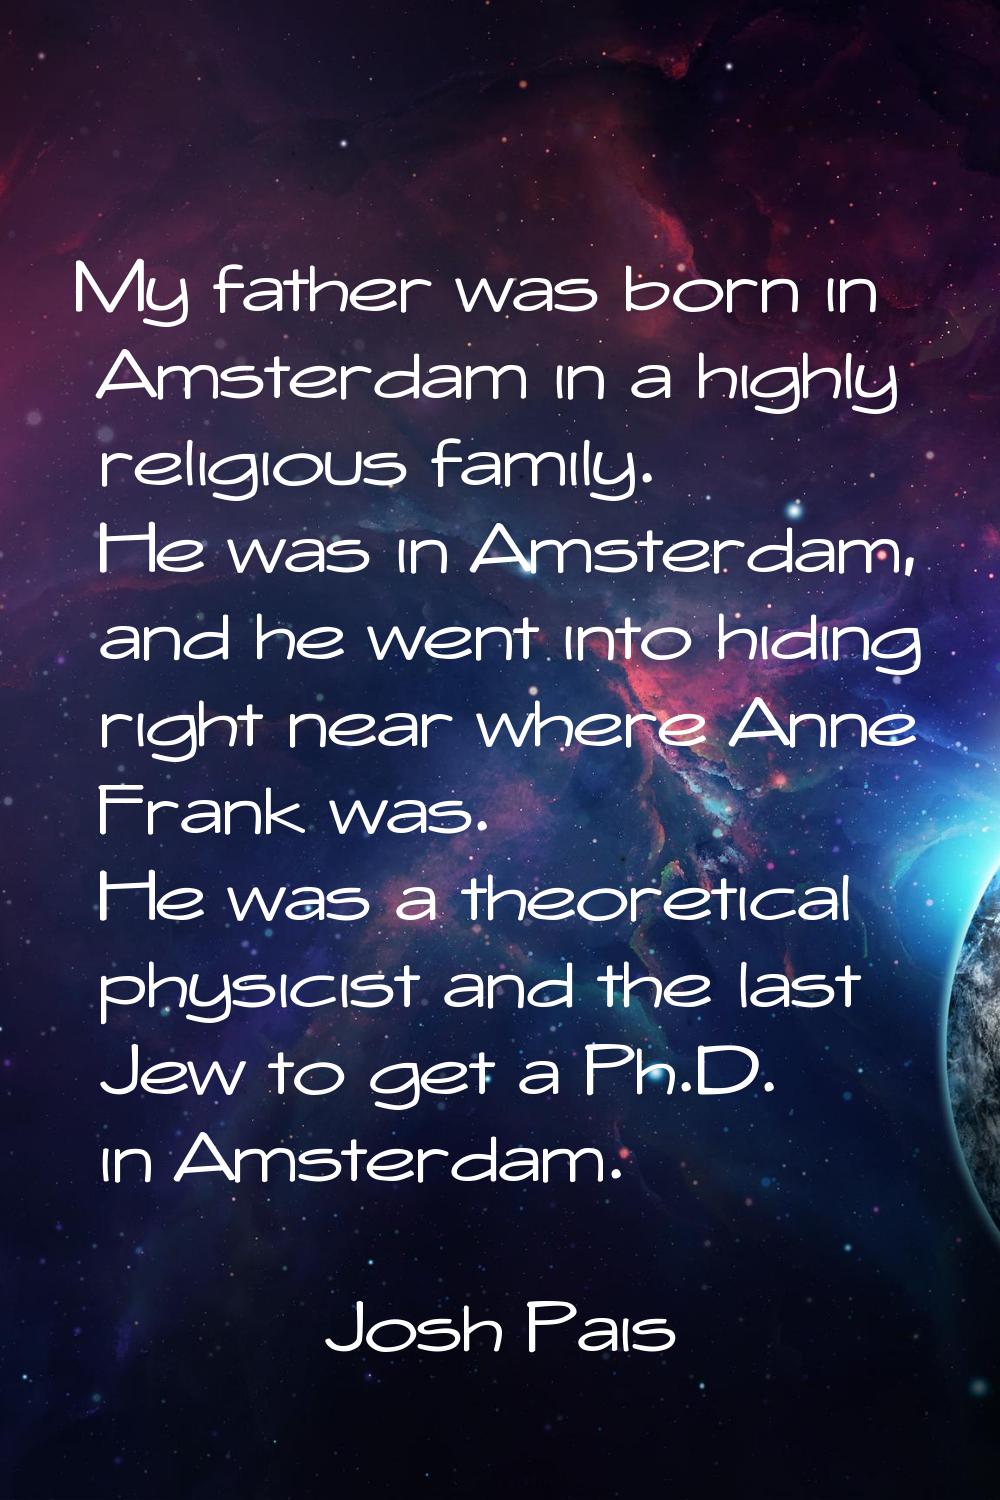 My father was born in Amsterdam in a highly religious family. He was in Amsterdam, and he went into